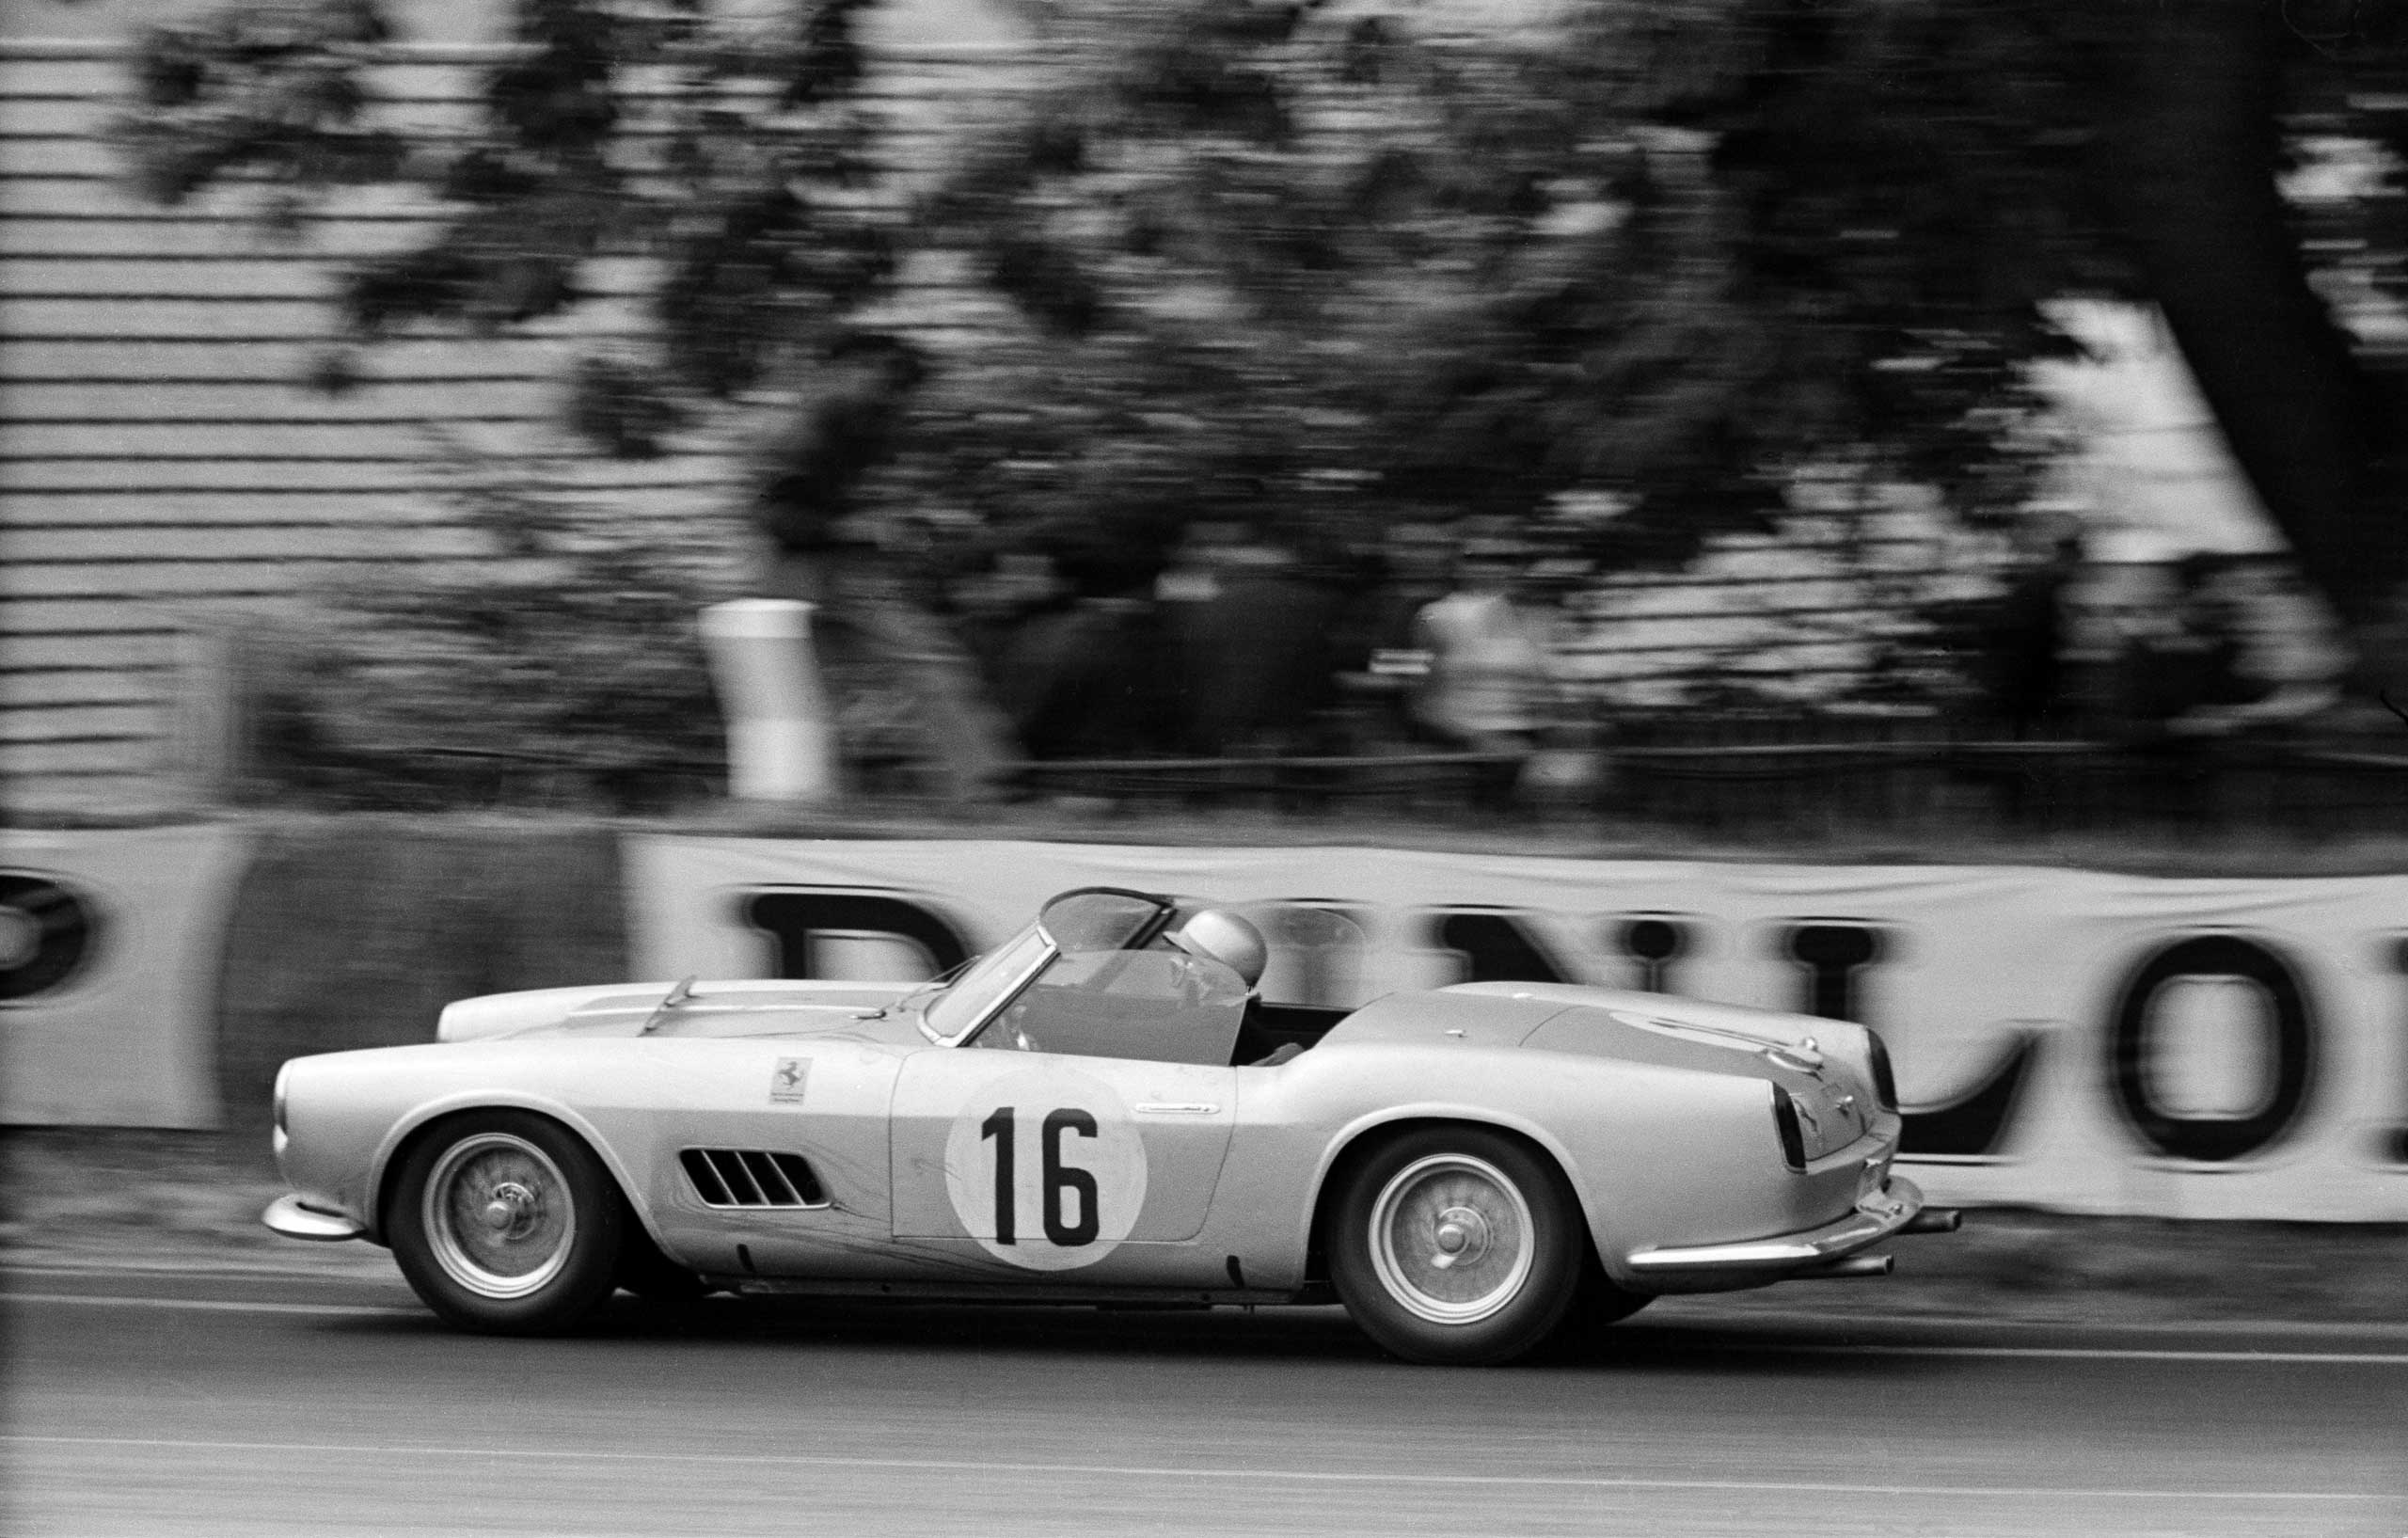 1957: The 250 GT California was an open top model with versions made for both racing and road driving.